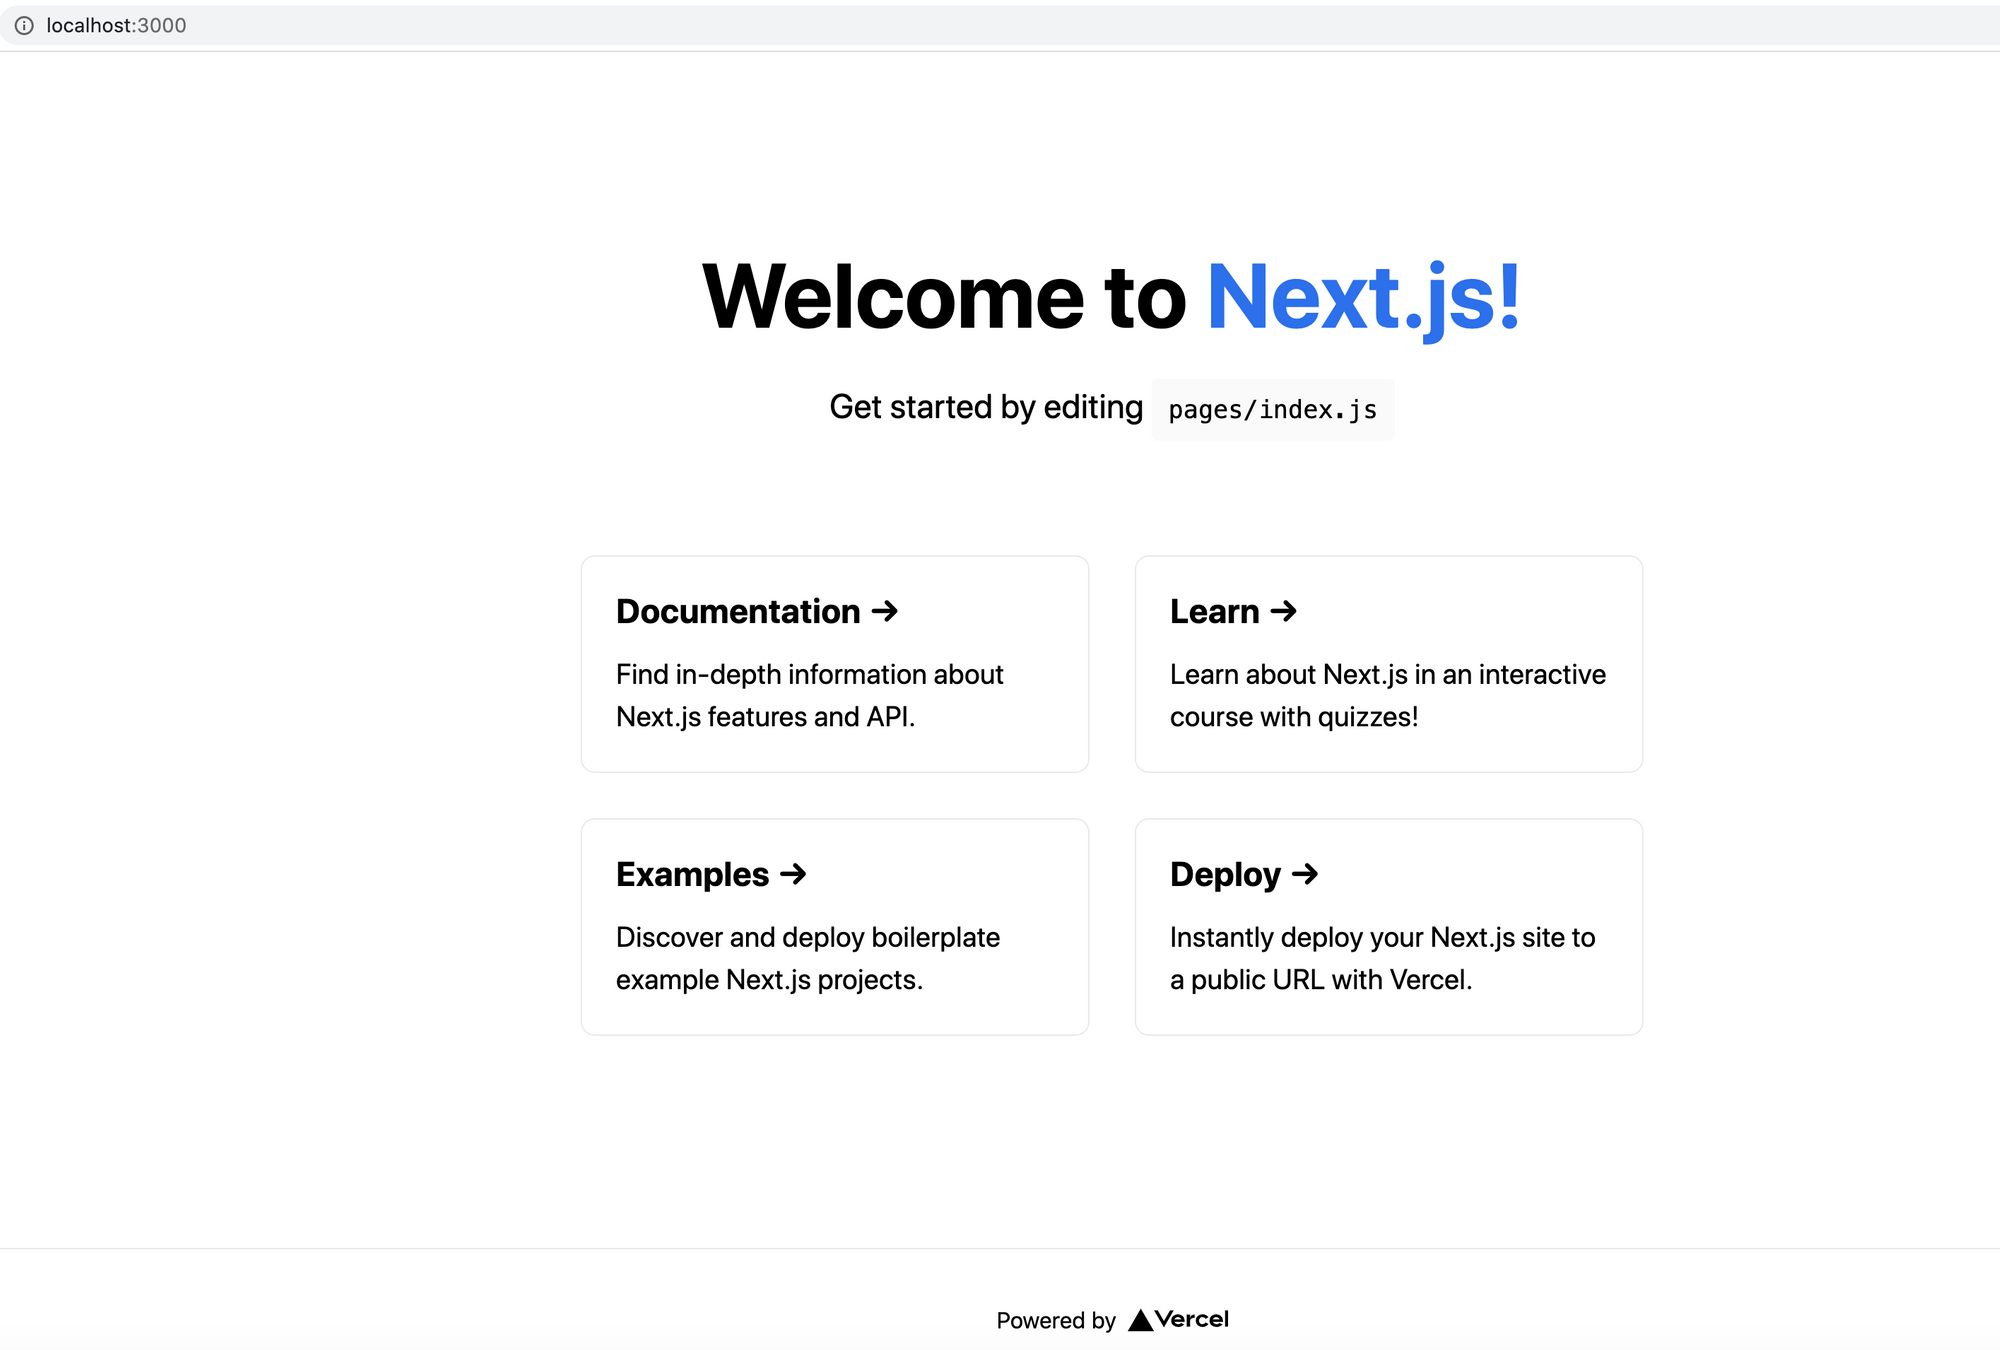 How to build forms on Next.js using Getform